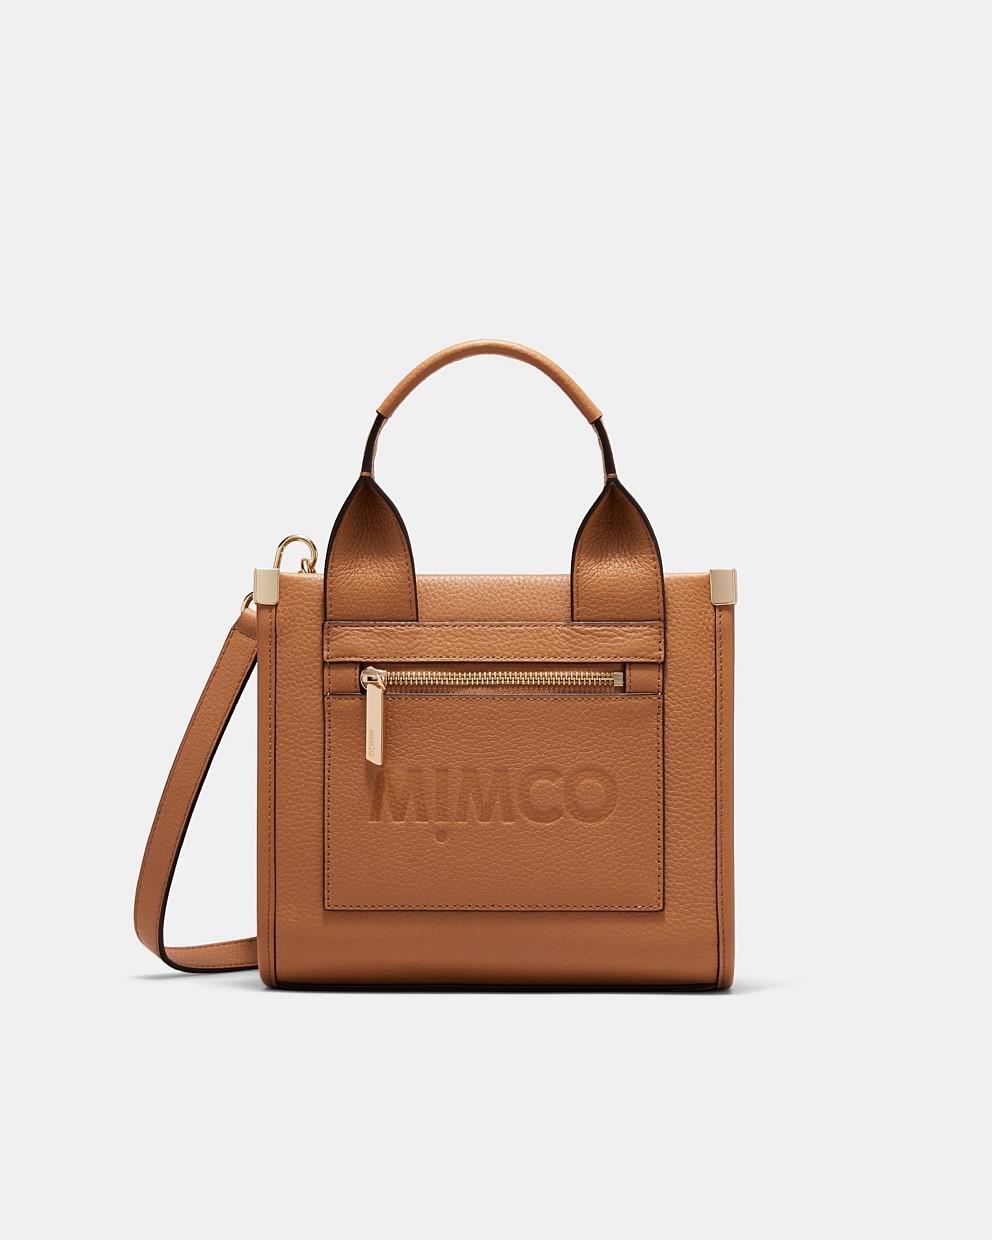 Caramel Patch Leather Mini Tote Bag - Bags | Mimco